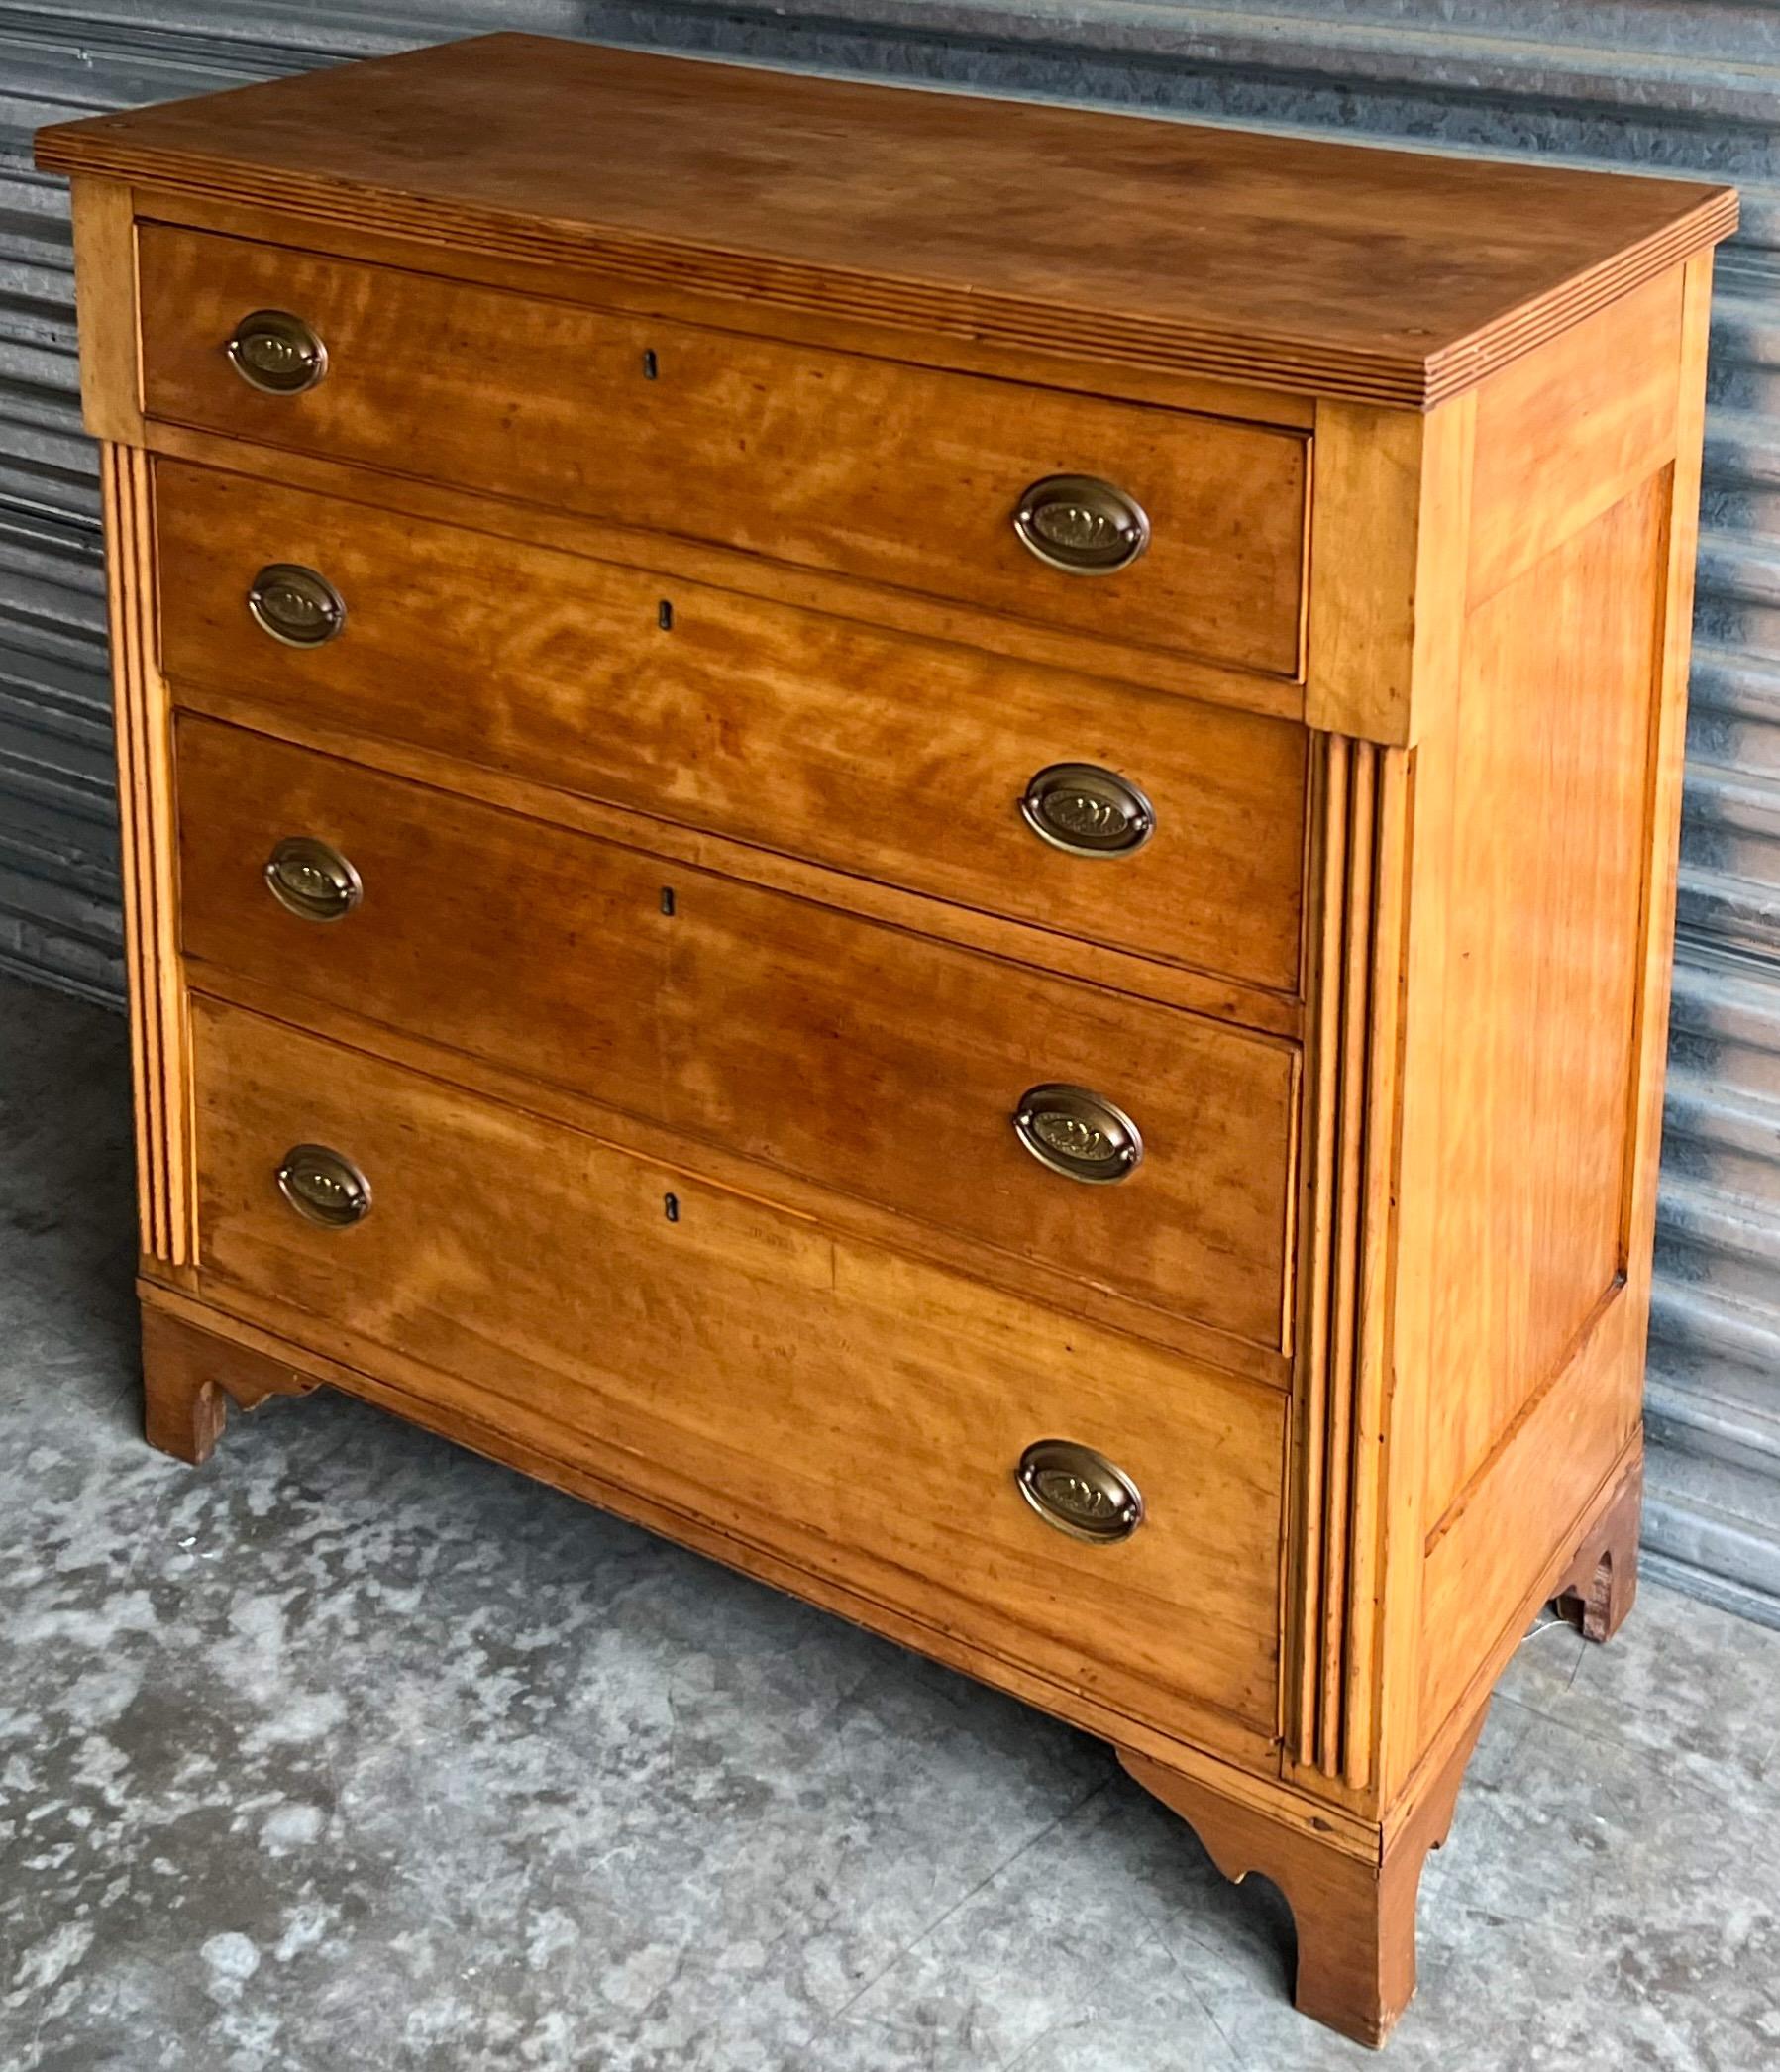 This is a timeless piece. It is a 19th century tiger maple chest of drawers. Note the feet and fluting! It also has peg construction. The hardware may or may not be original. It is in very good antique condition.

My shipping is for the Continental